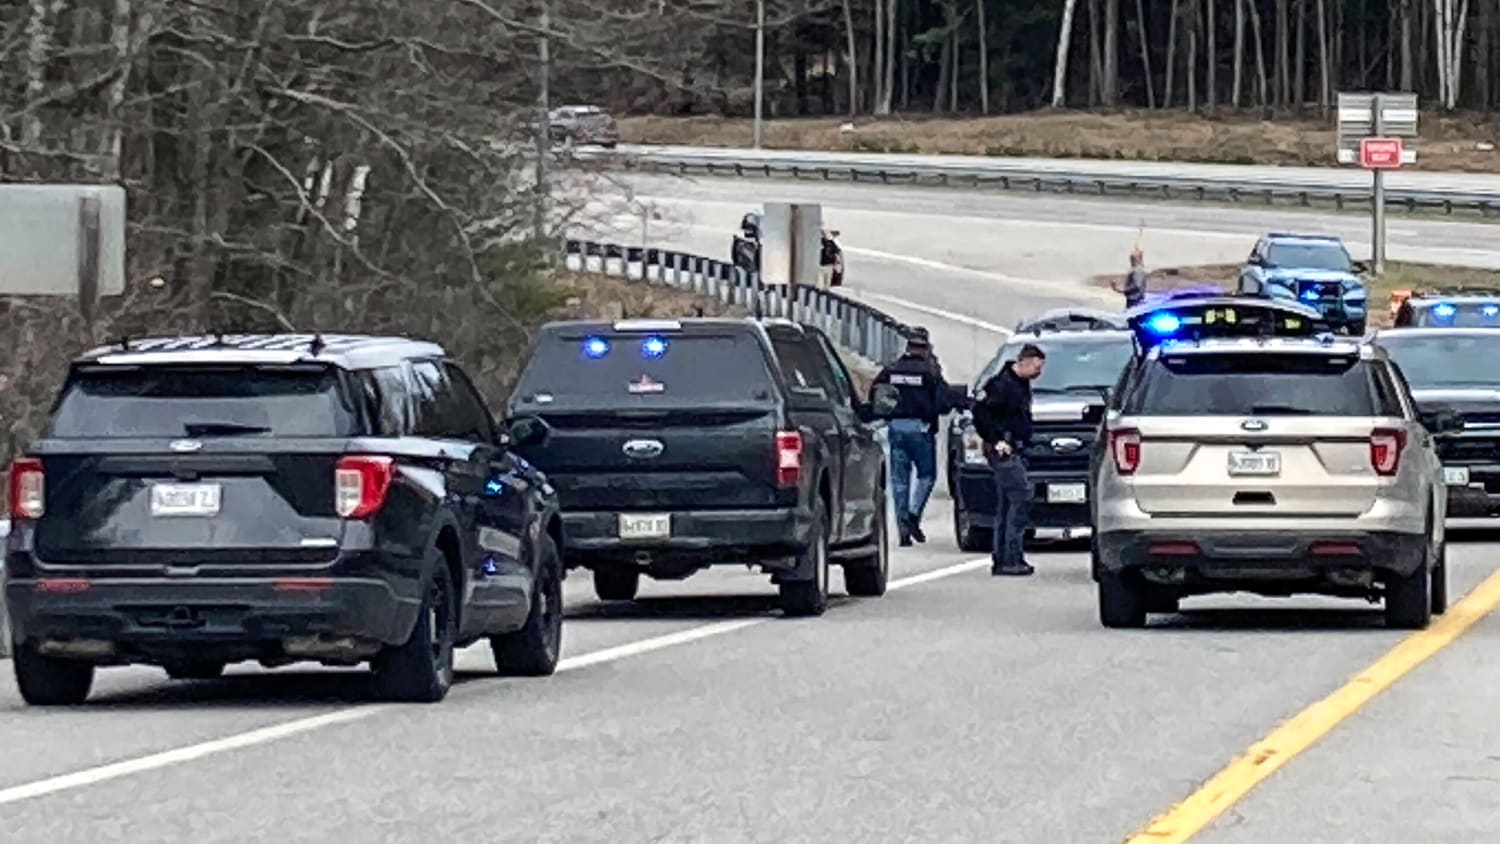 4 fatally shot in a Maine home and 3 others wounded after gunfire erupts on a highway